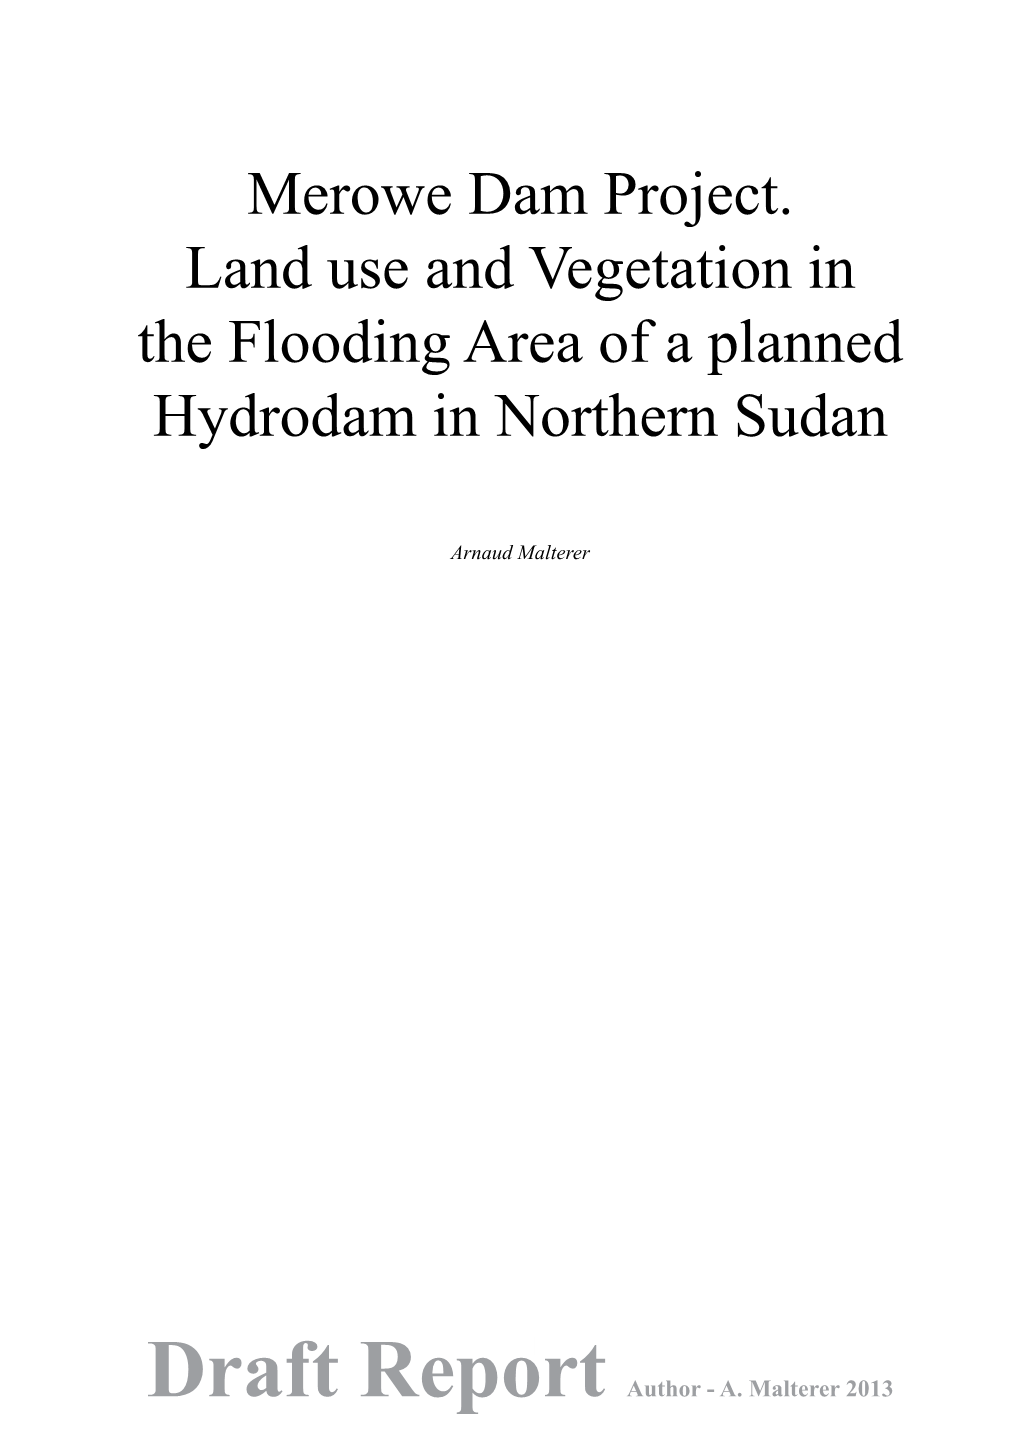 Merowe Dam Project. Land Use and Vegetation in the Flooding Area of a Planned Hydrodam in Northern Sudan